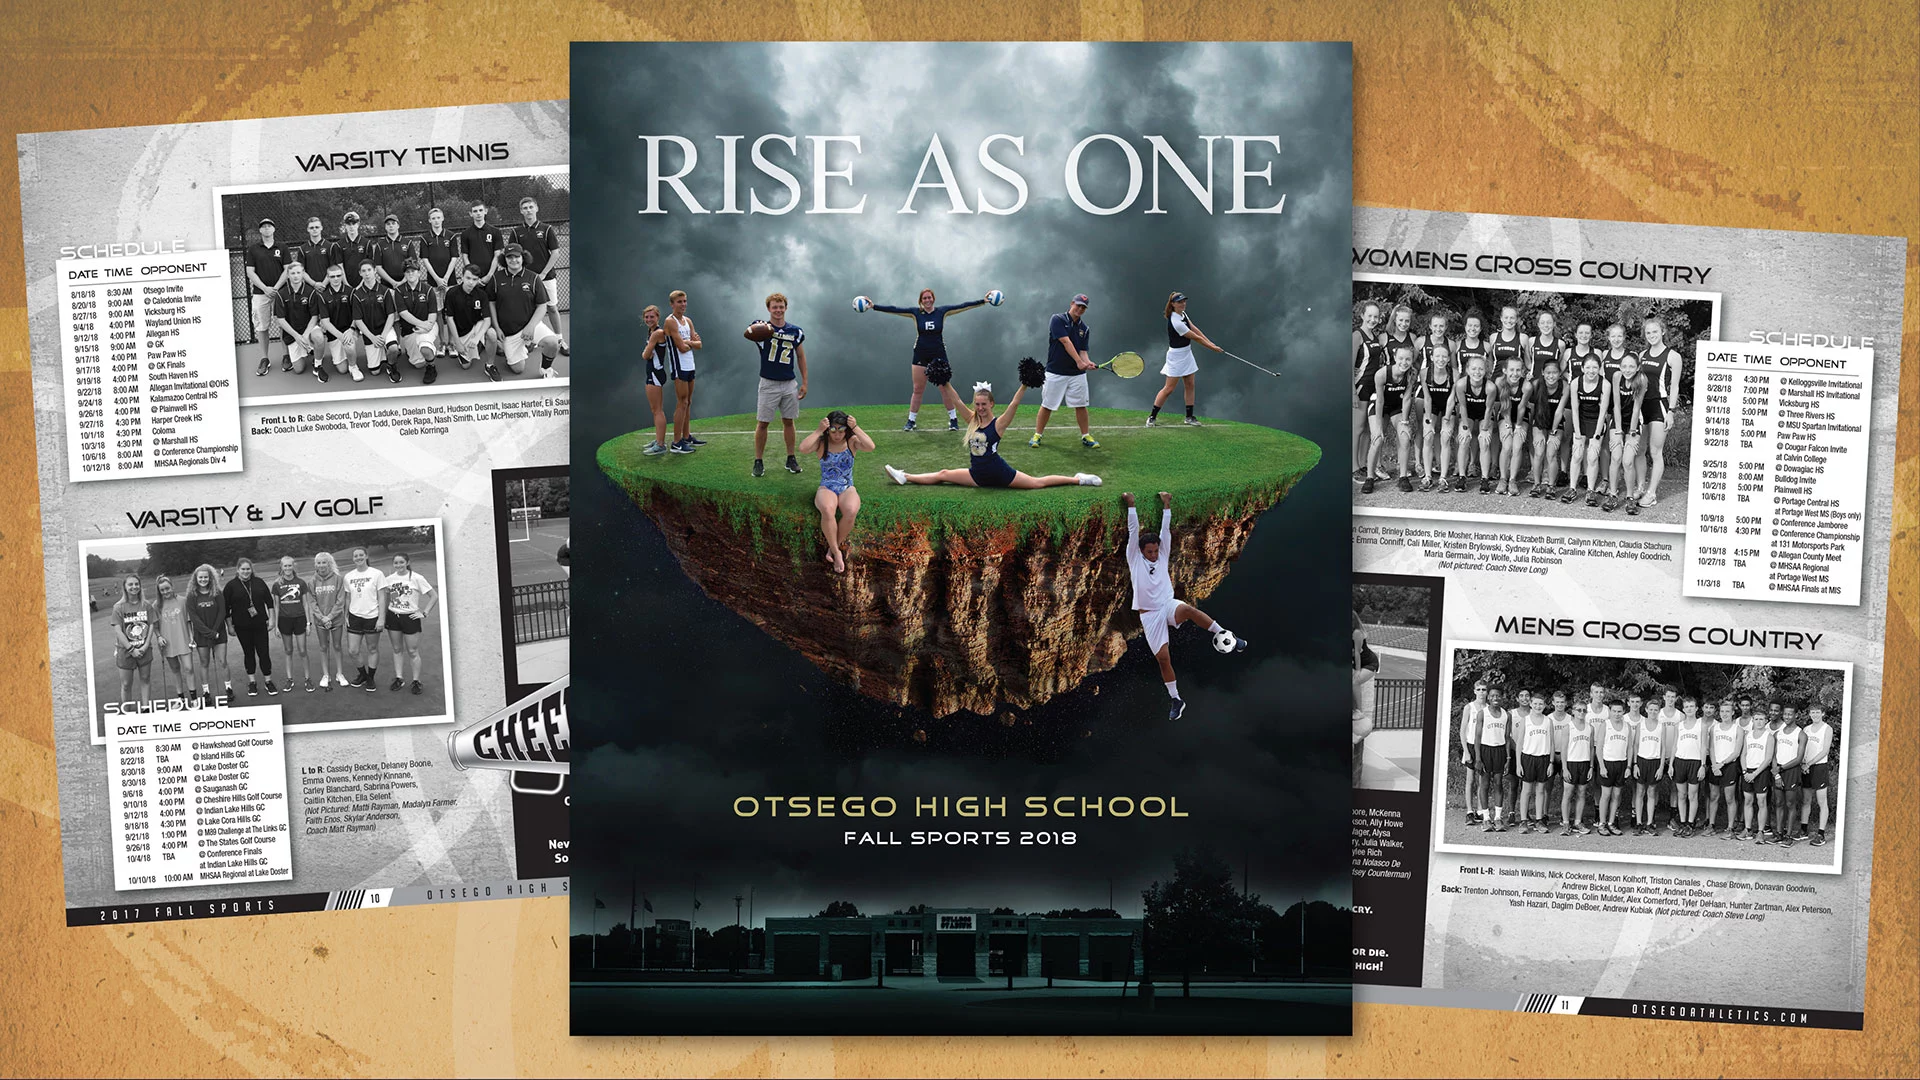 OPS School Rise as one Poster